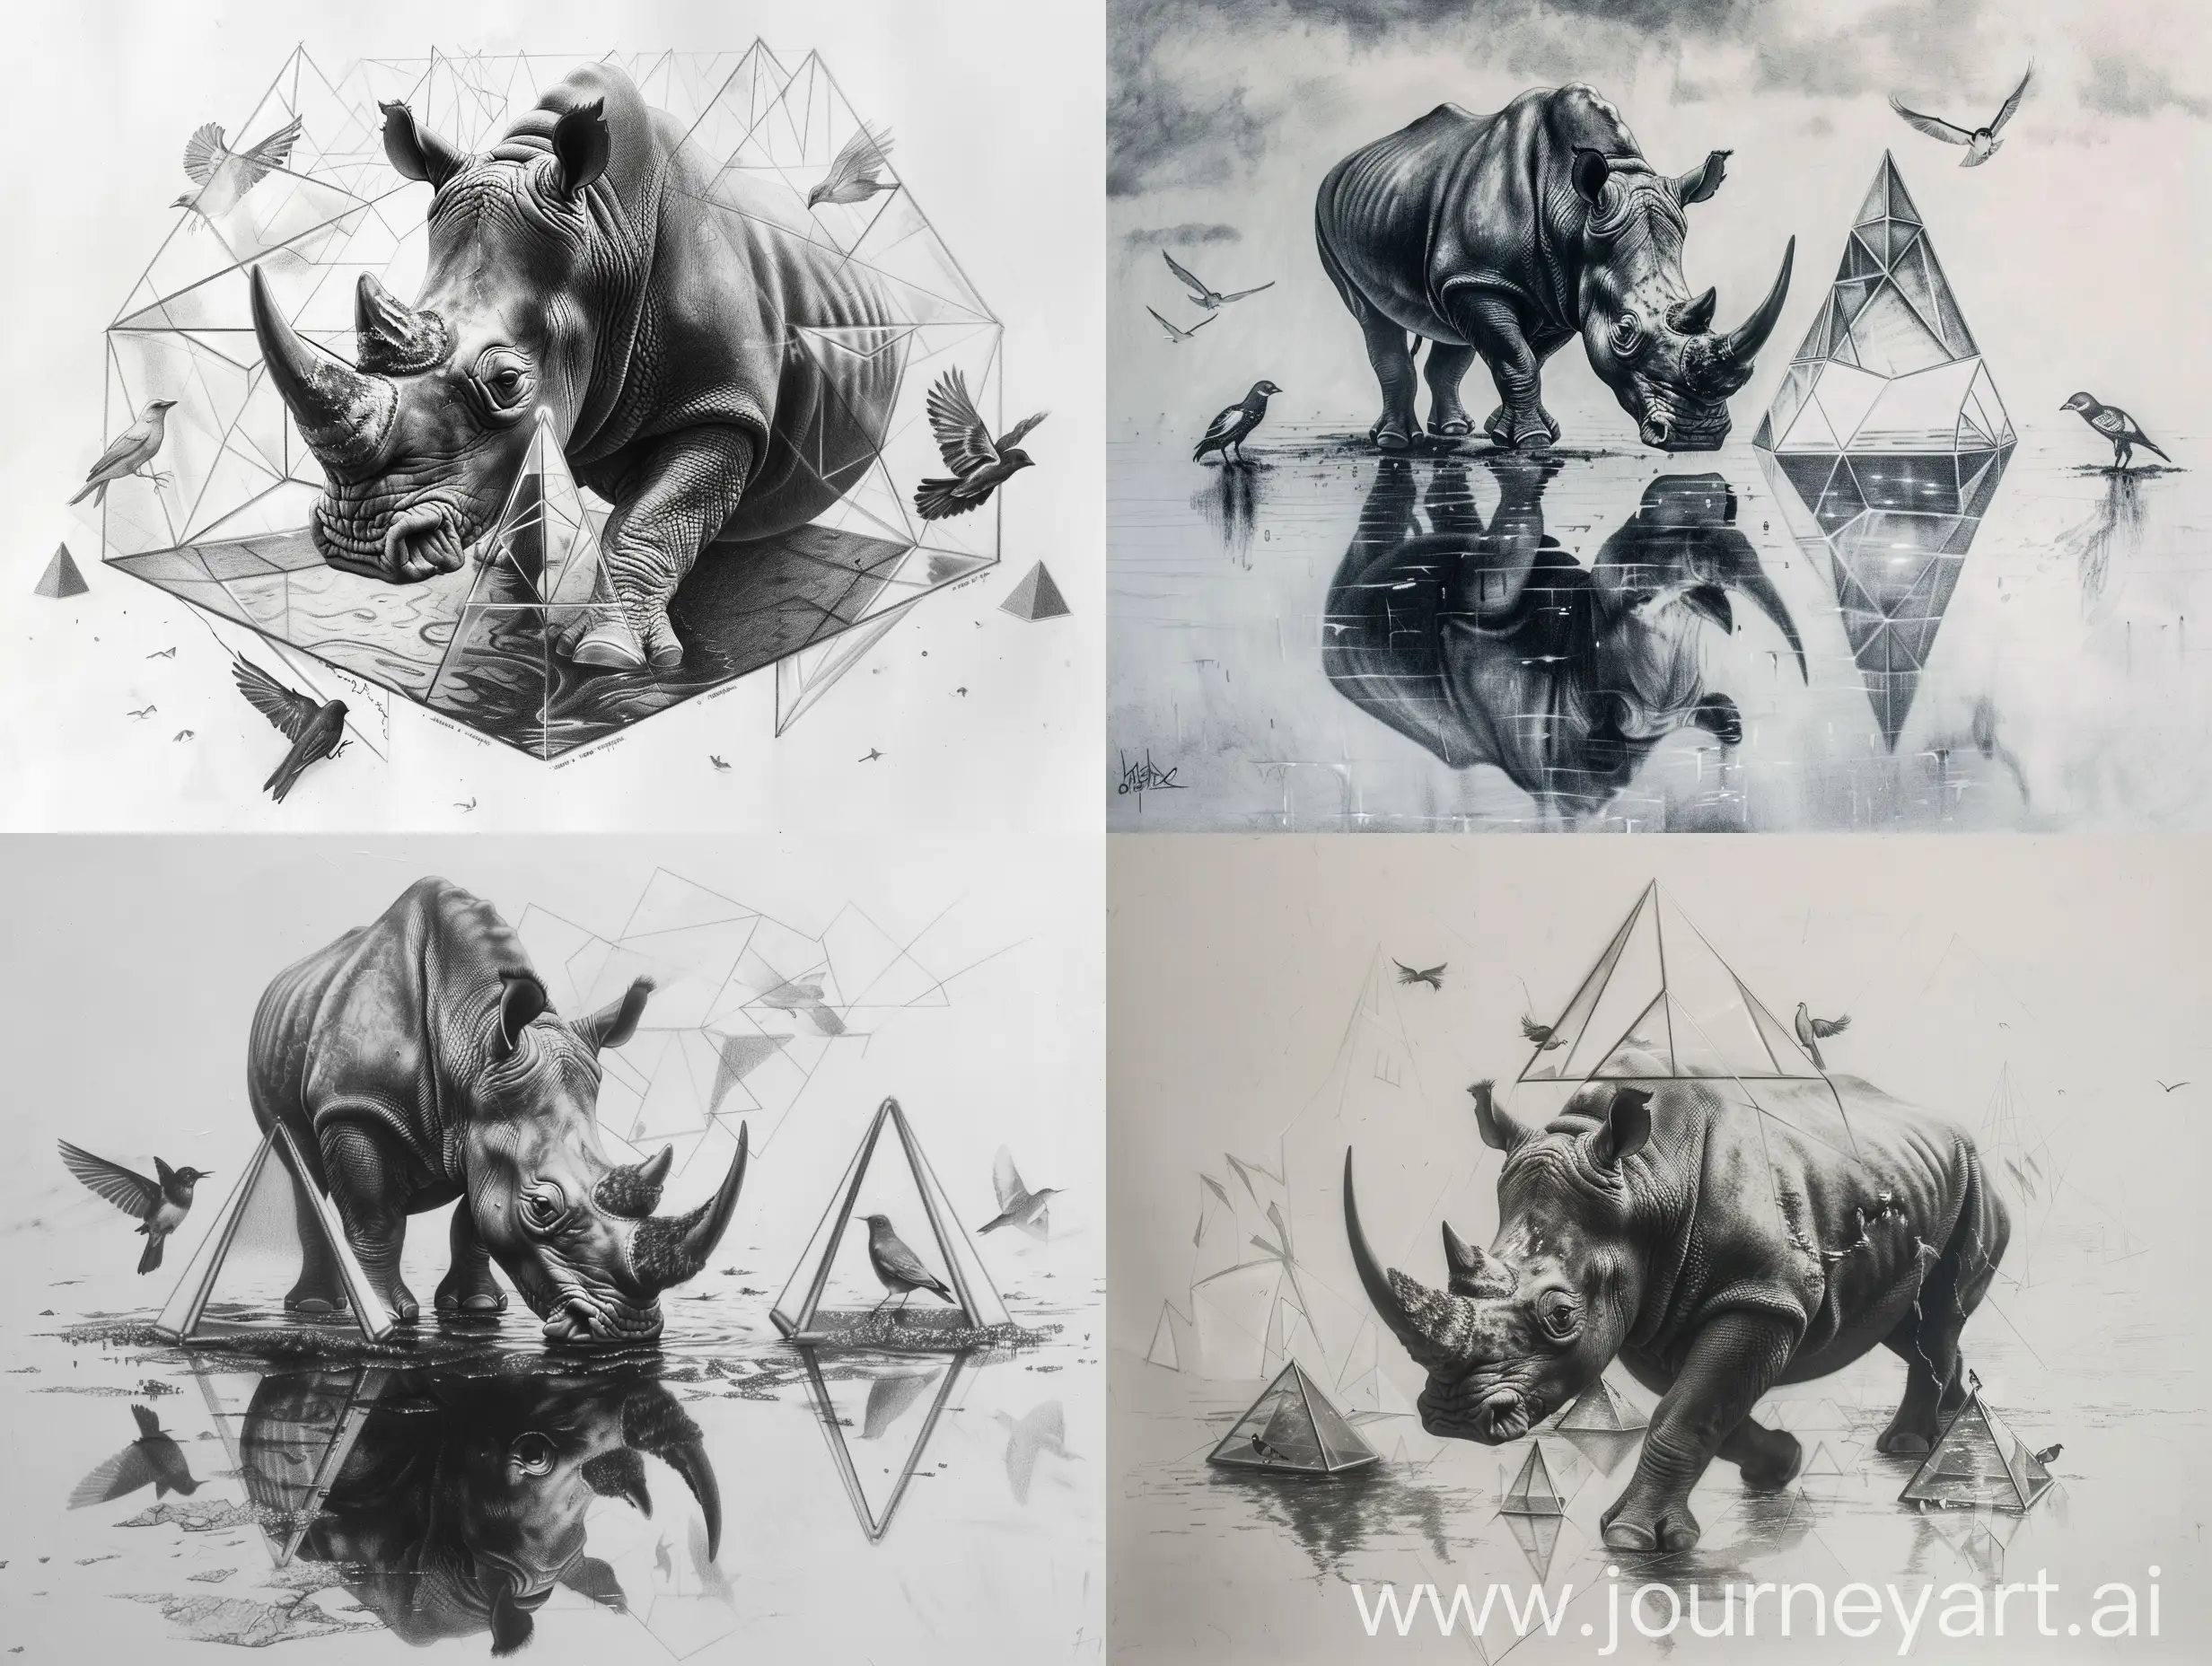 creative dark hyper realistic pencil sketch of a rhino on a glass surface with small mirrors and birds around it on a large canvas in great details